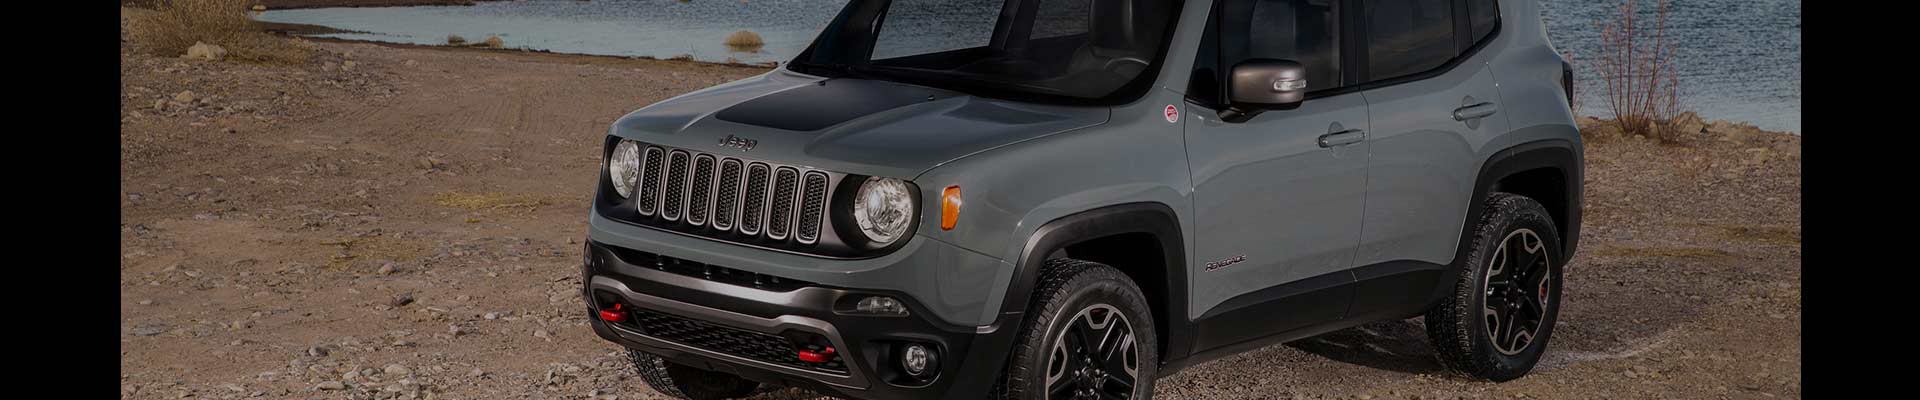 Shop Replacement and OEM 2022 Jeep Renegade Parts with Discounted Price on the Net